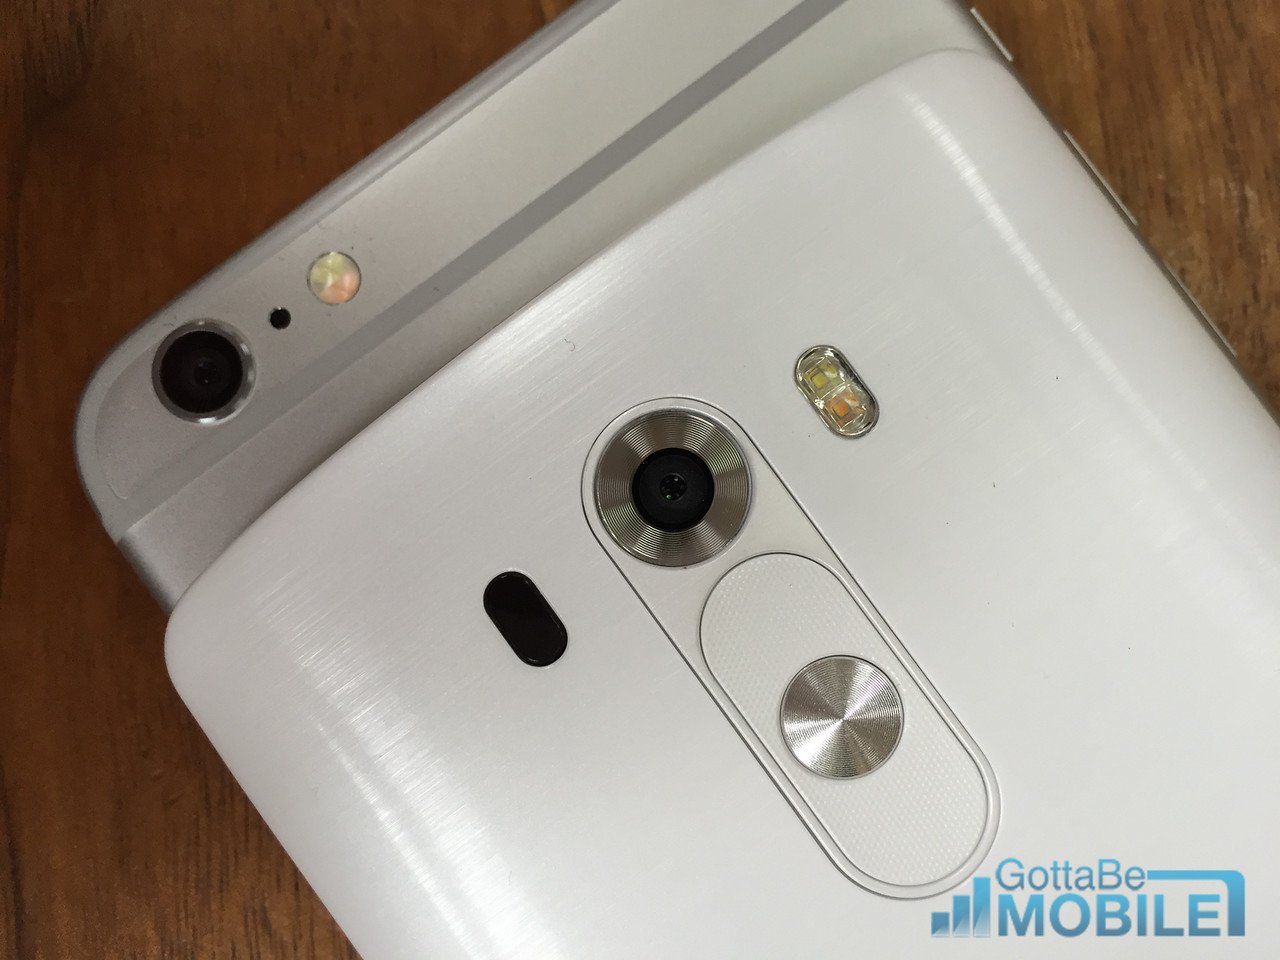 Here's how the LG G3 and iPhone 6 Plus cameras compare.